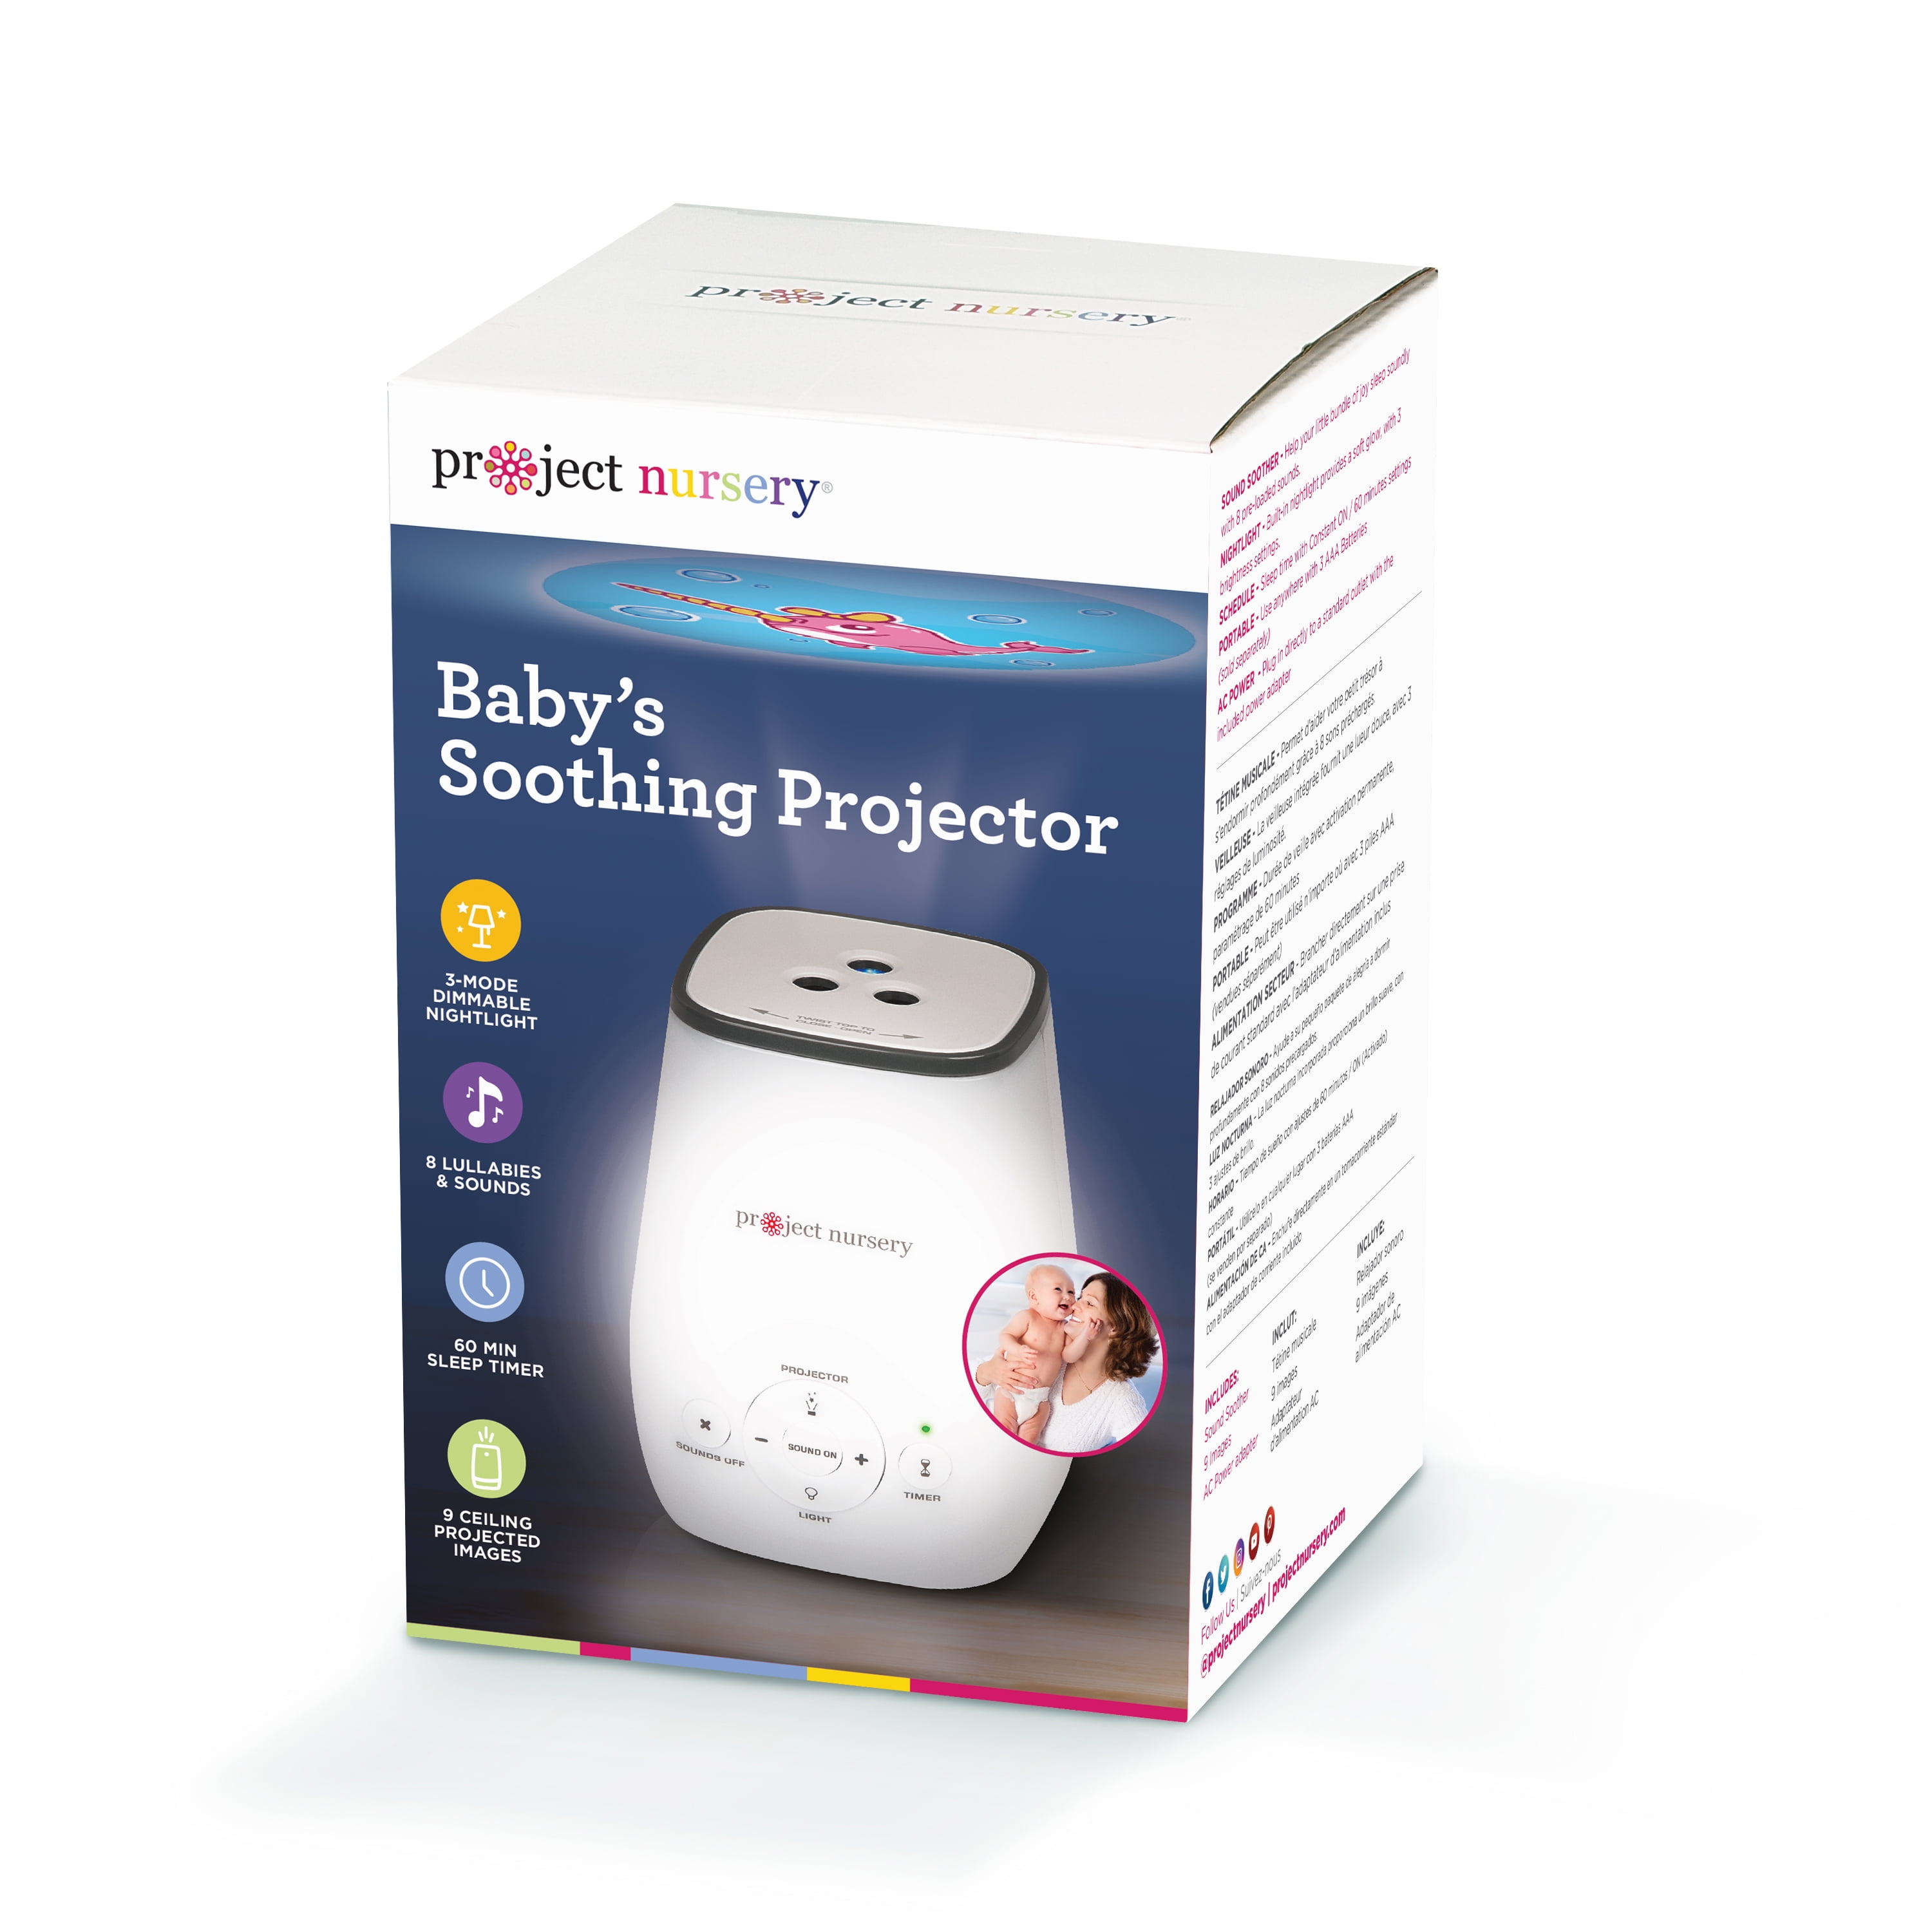 Kruis aan Anemoon vis Bezighouden Project Nursery 4-in-1 Soothing Projector with 8 Pre-Loaded Sounds,  Nightlight and Timer - White - Walmart.com